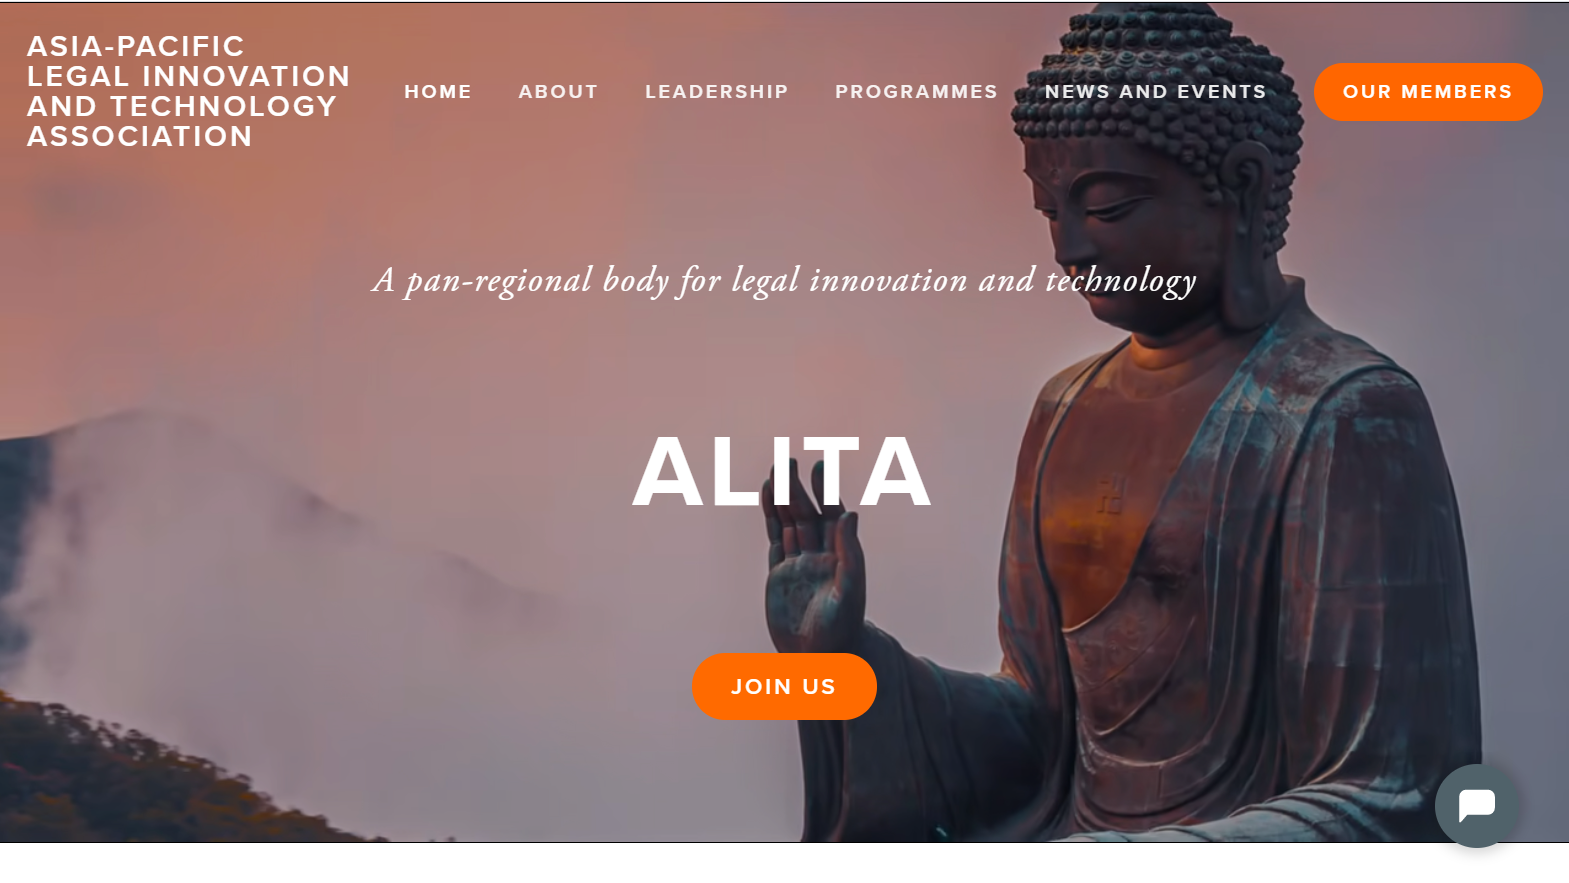 Asia-Pacific Legal Association Partners with Theorem LTS to Launch Membership Portal and Legal Tech Marketplace